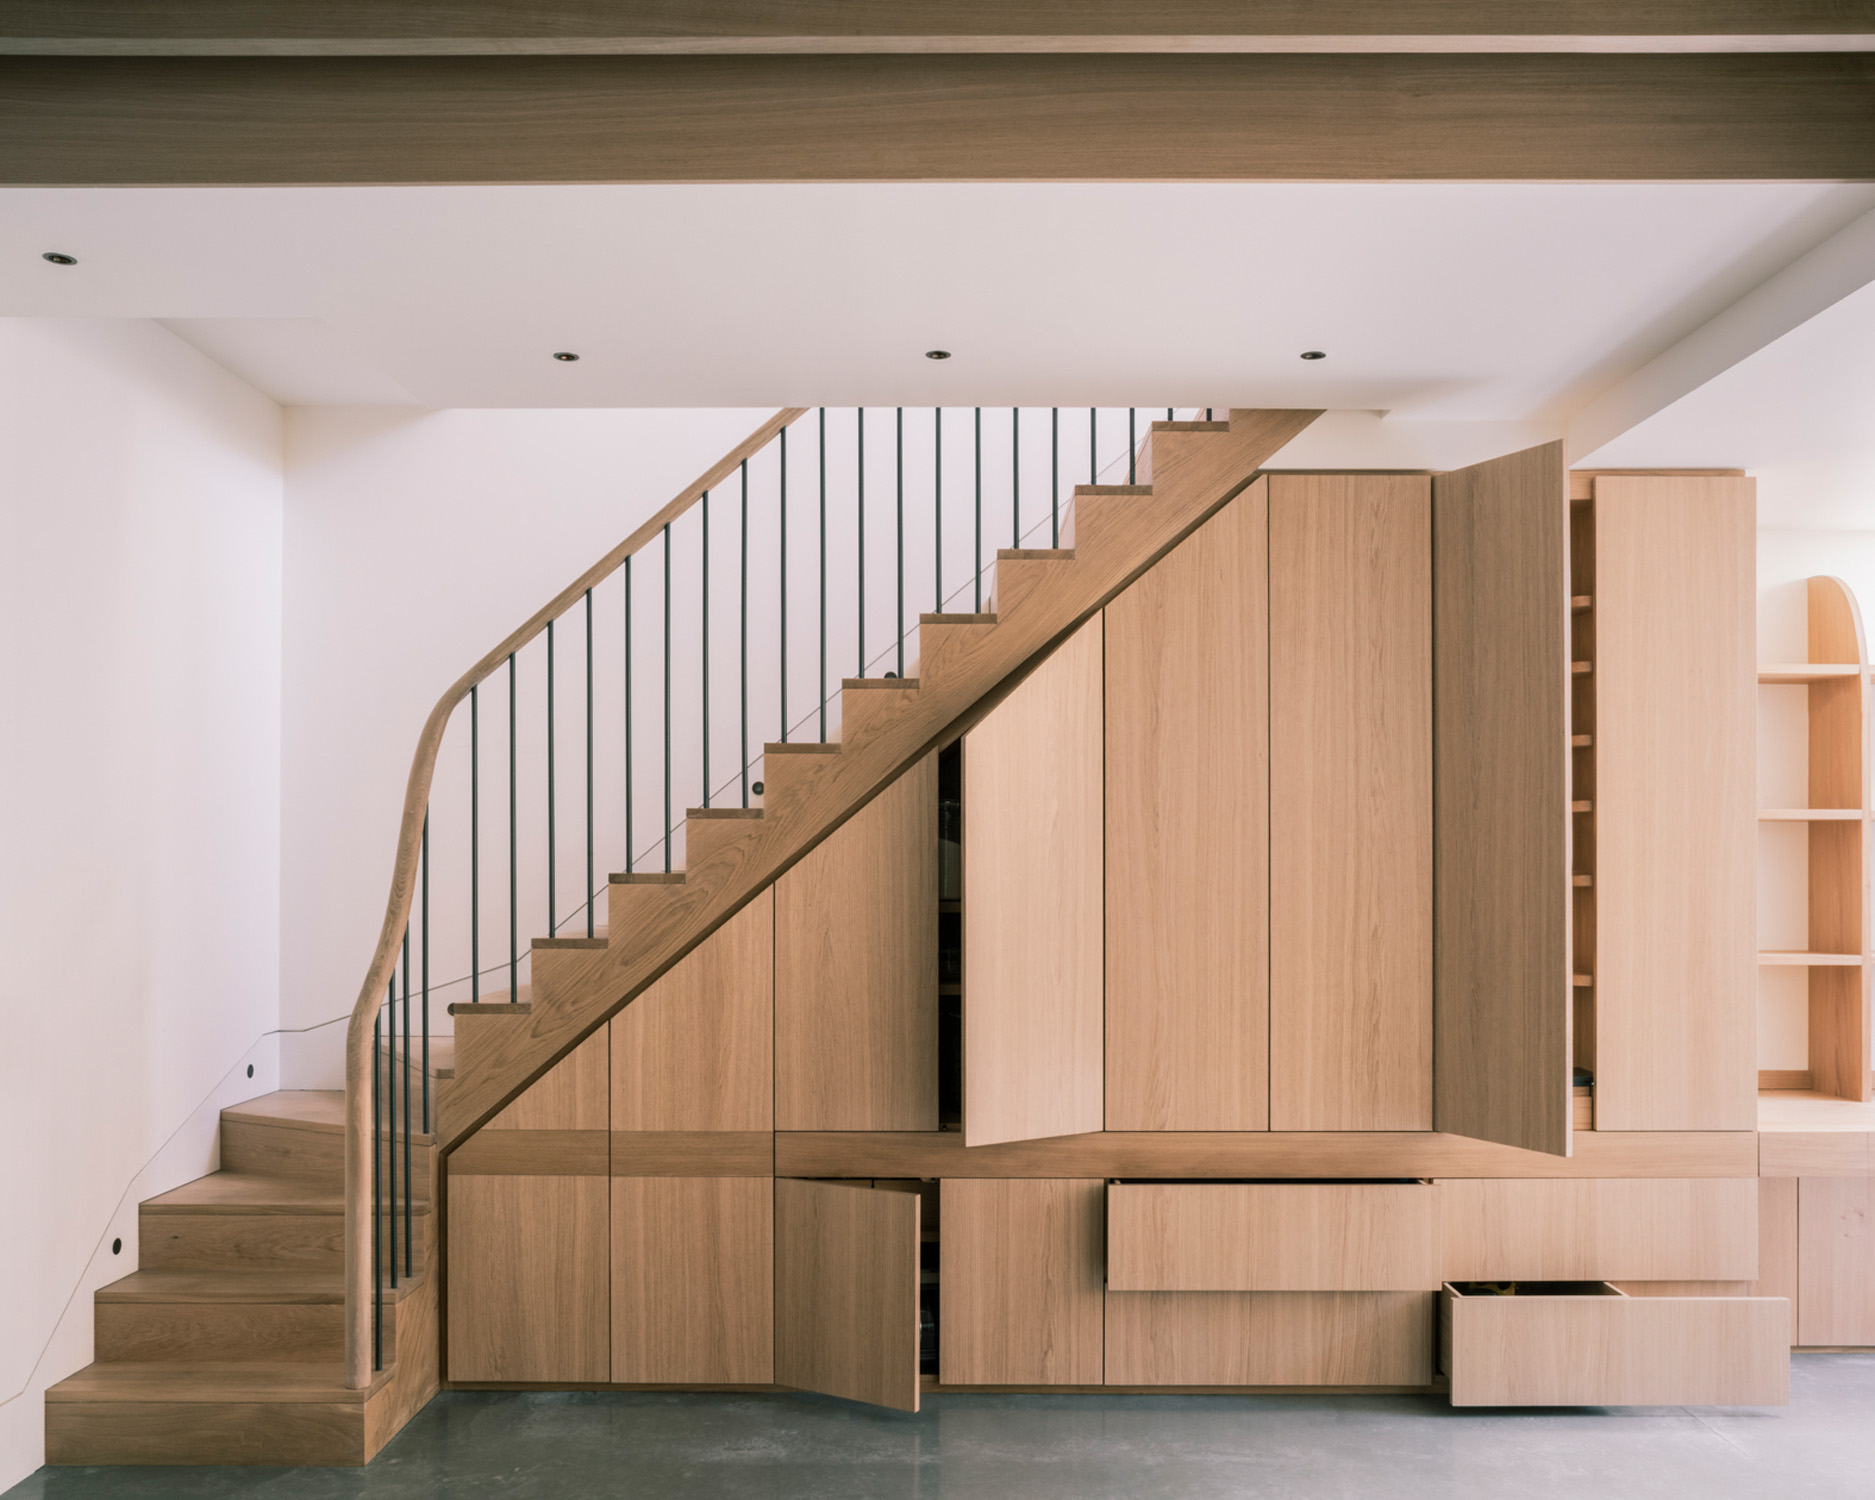 Staircase at Portland Road by Stiff + Trevillion